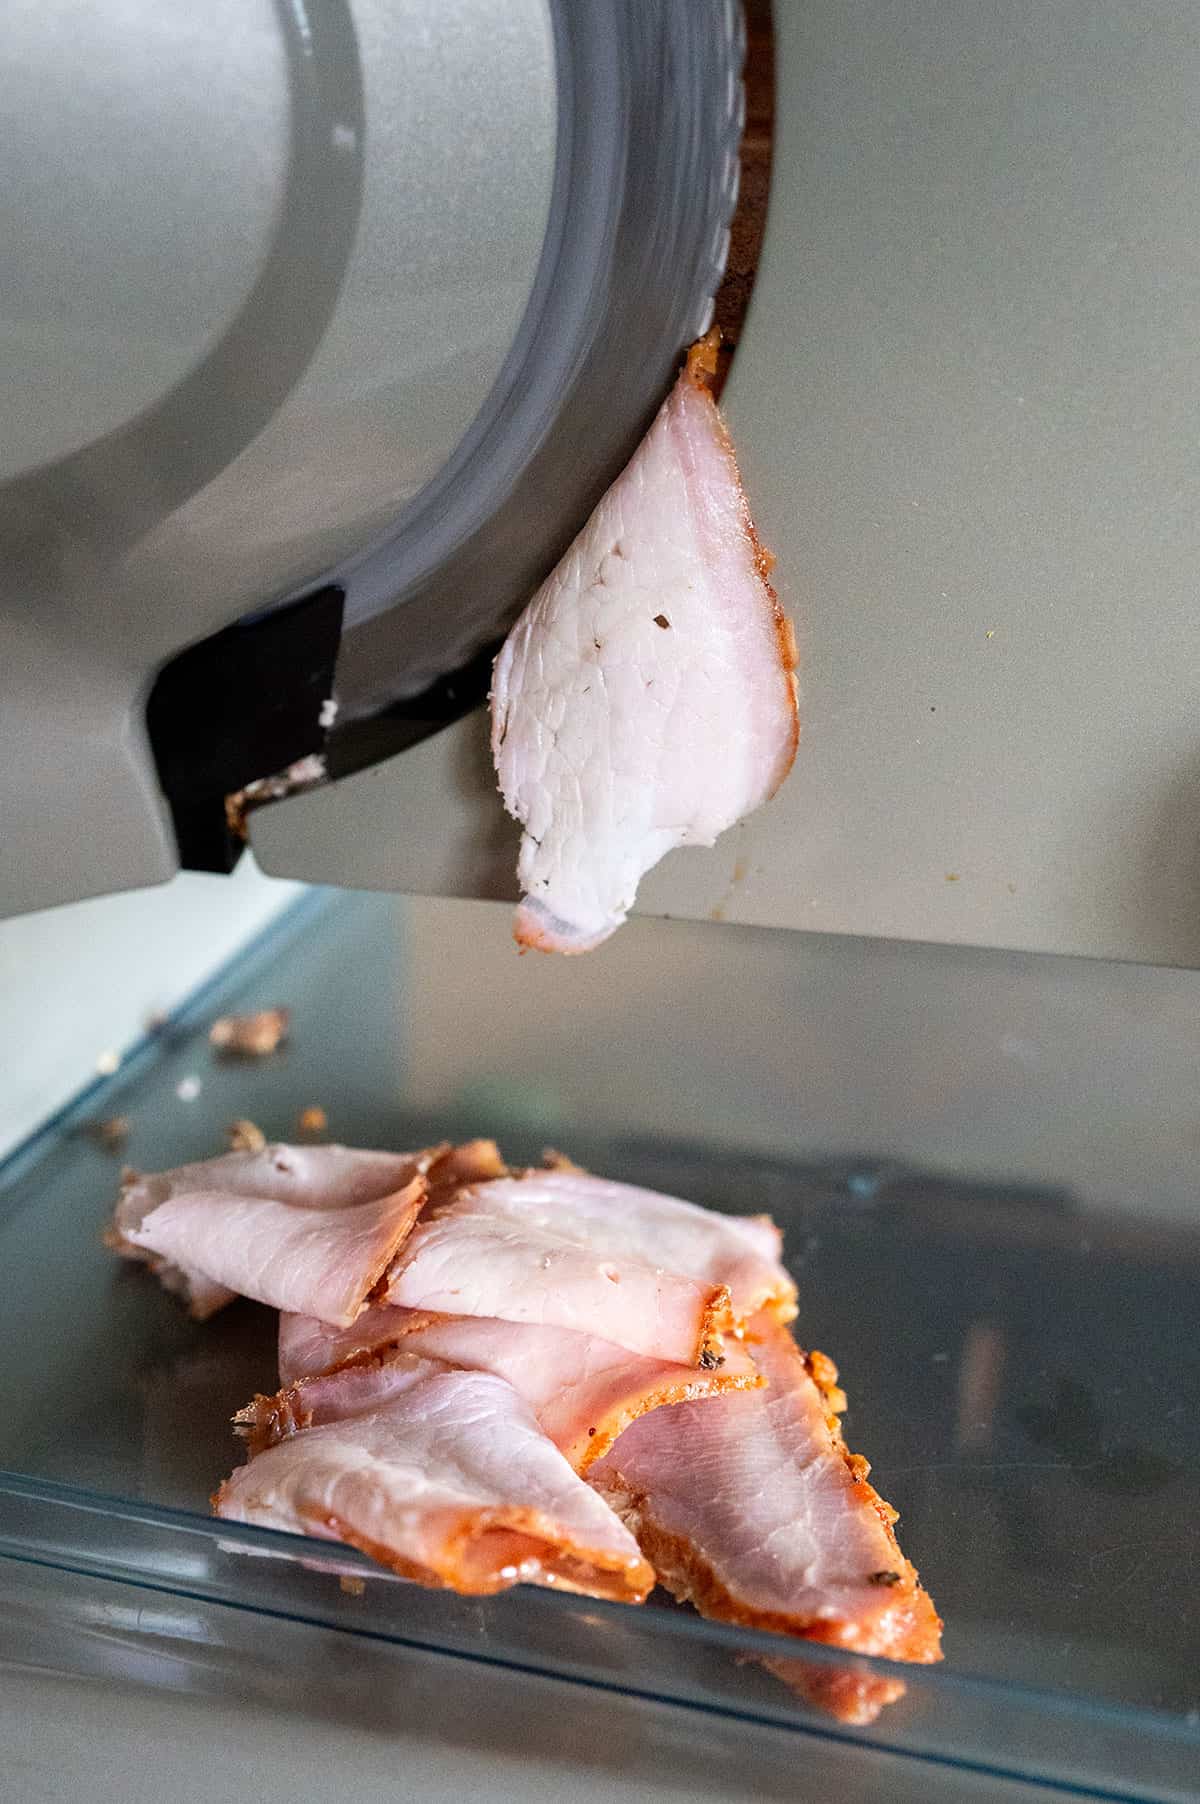 Thinly slicing a smoked pork loin to make lunch meat.